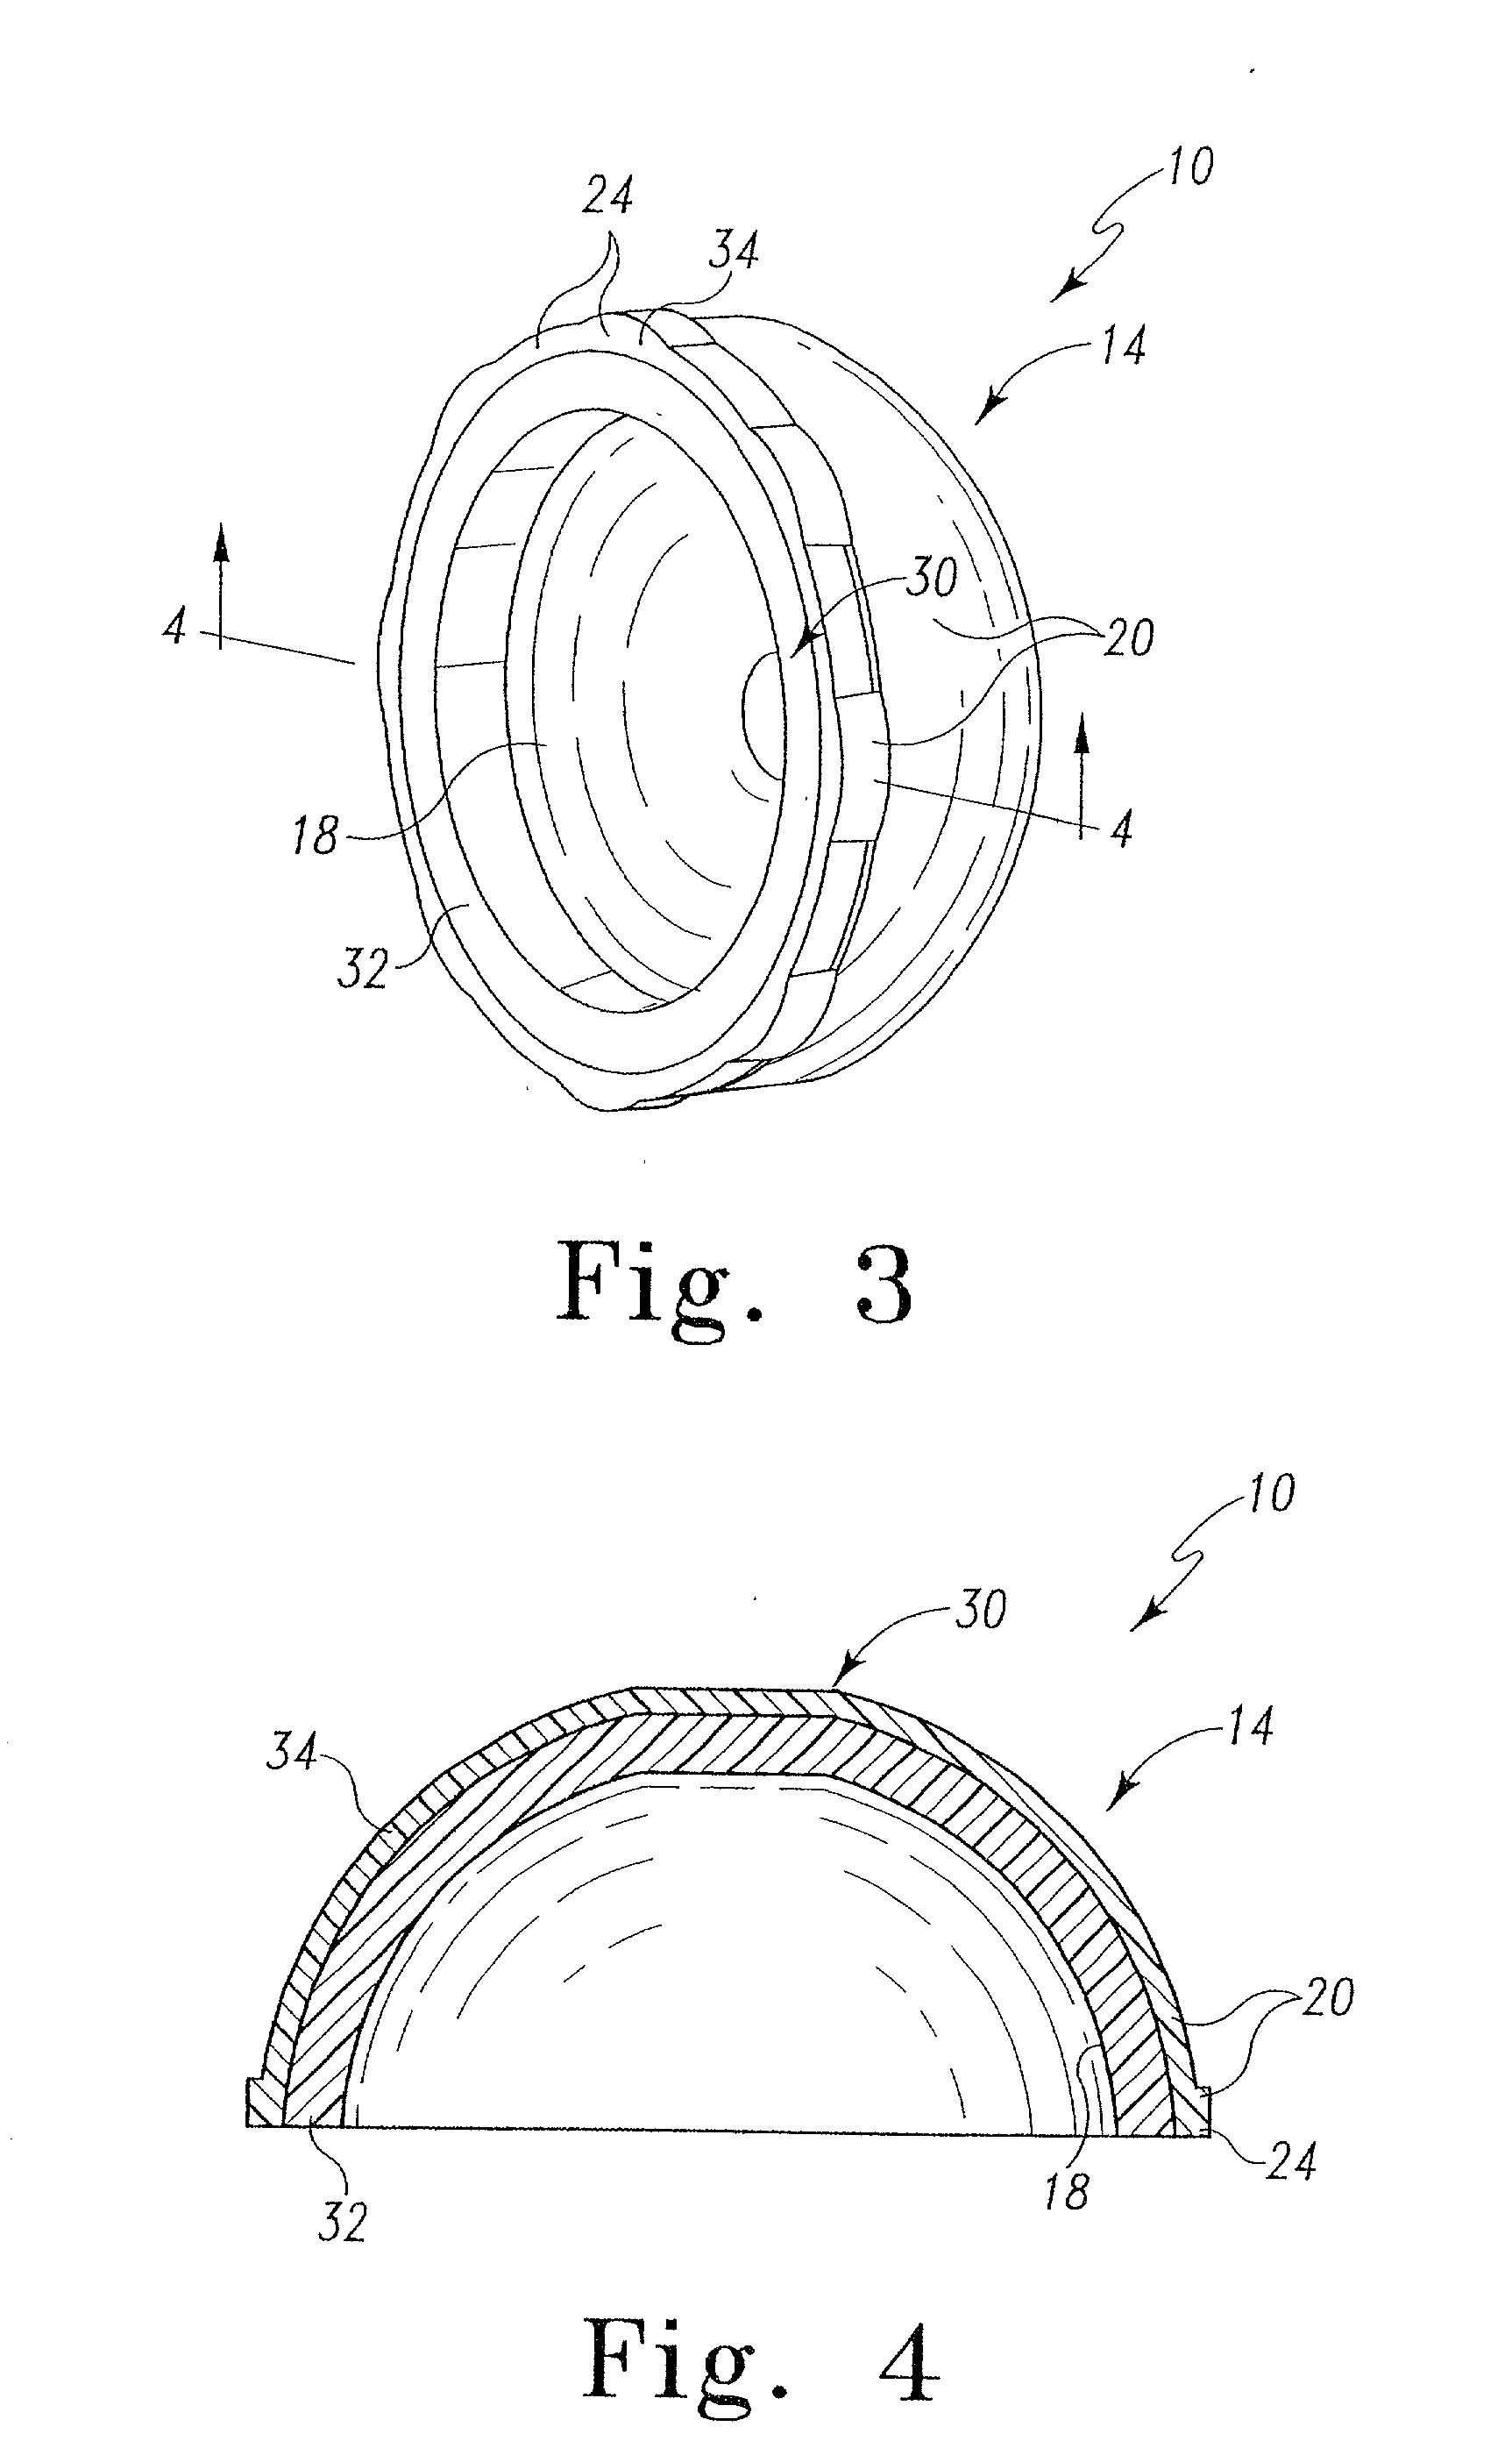 Composite prosthetic bearing constructed of polyethylene and an ethylene-acrylate copolymer and method for making the same